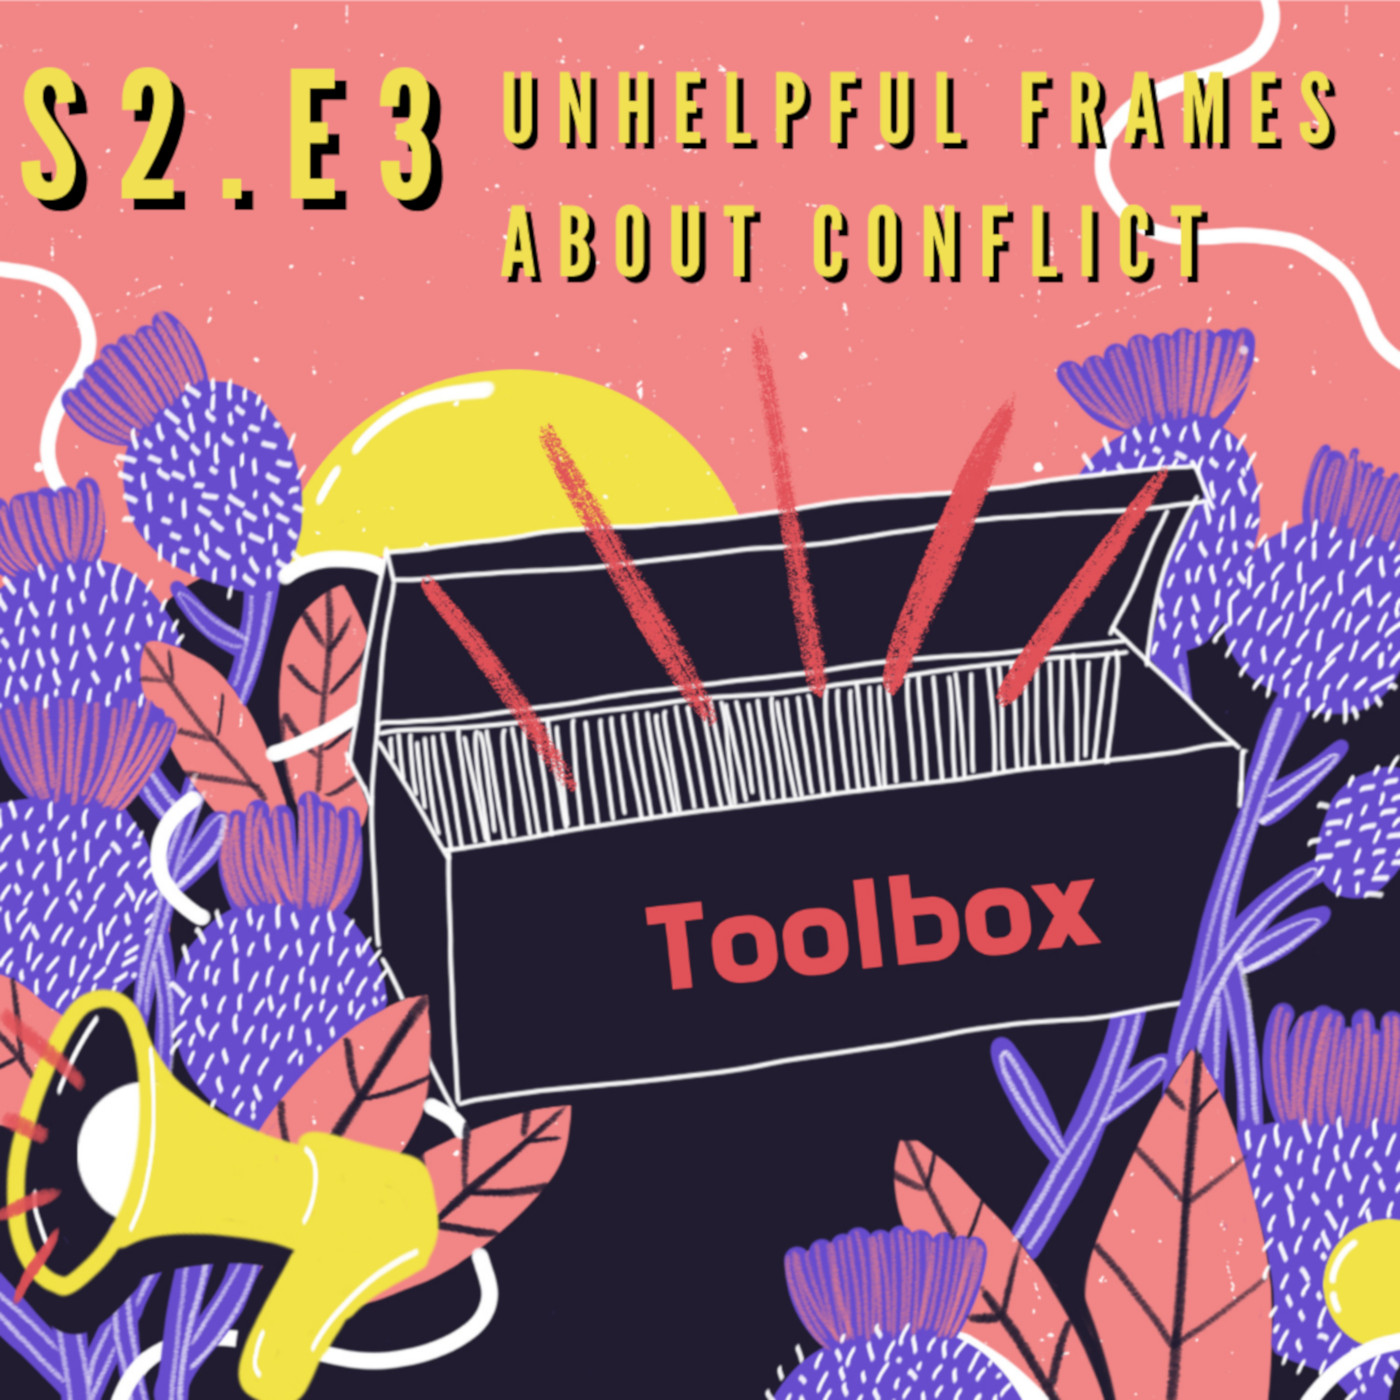 Toolbox: Unhelpful frames about conflict